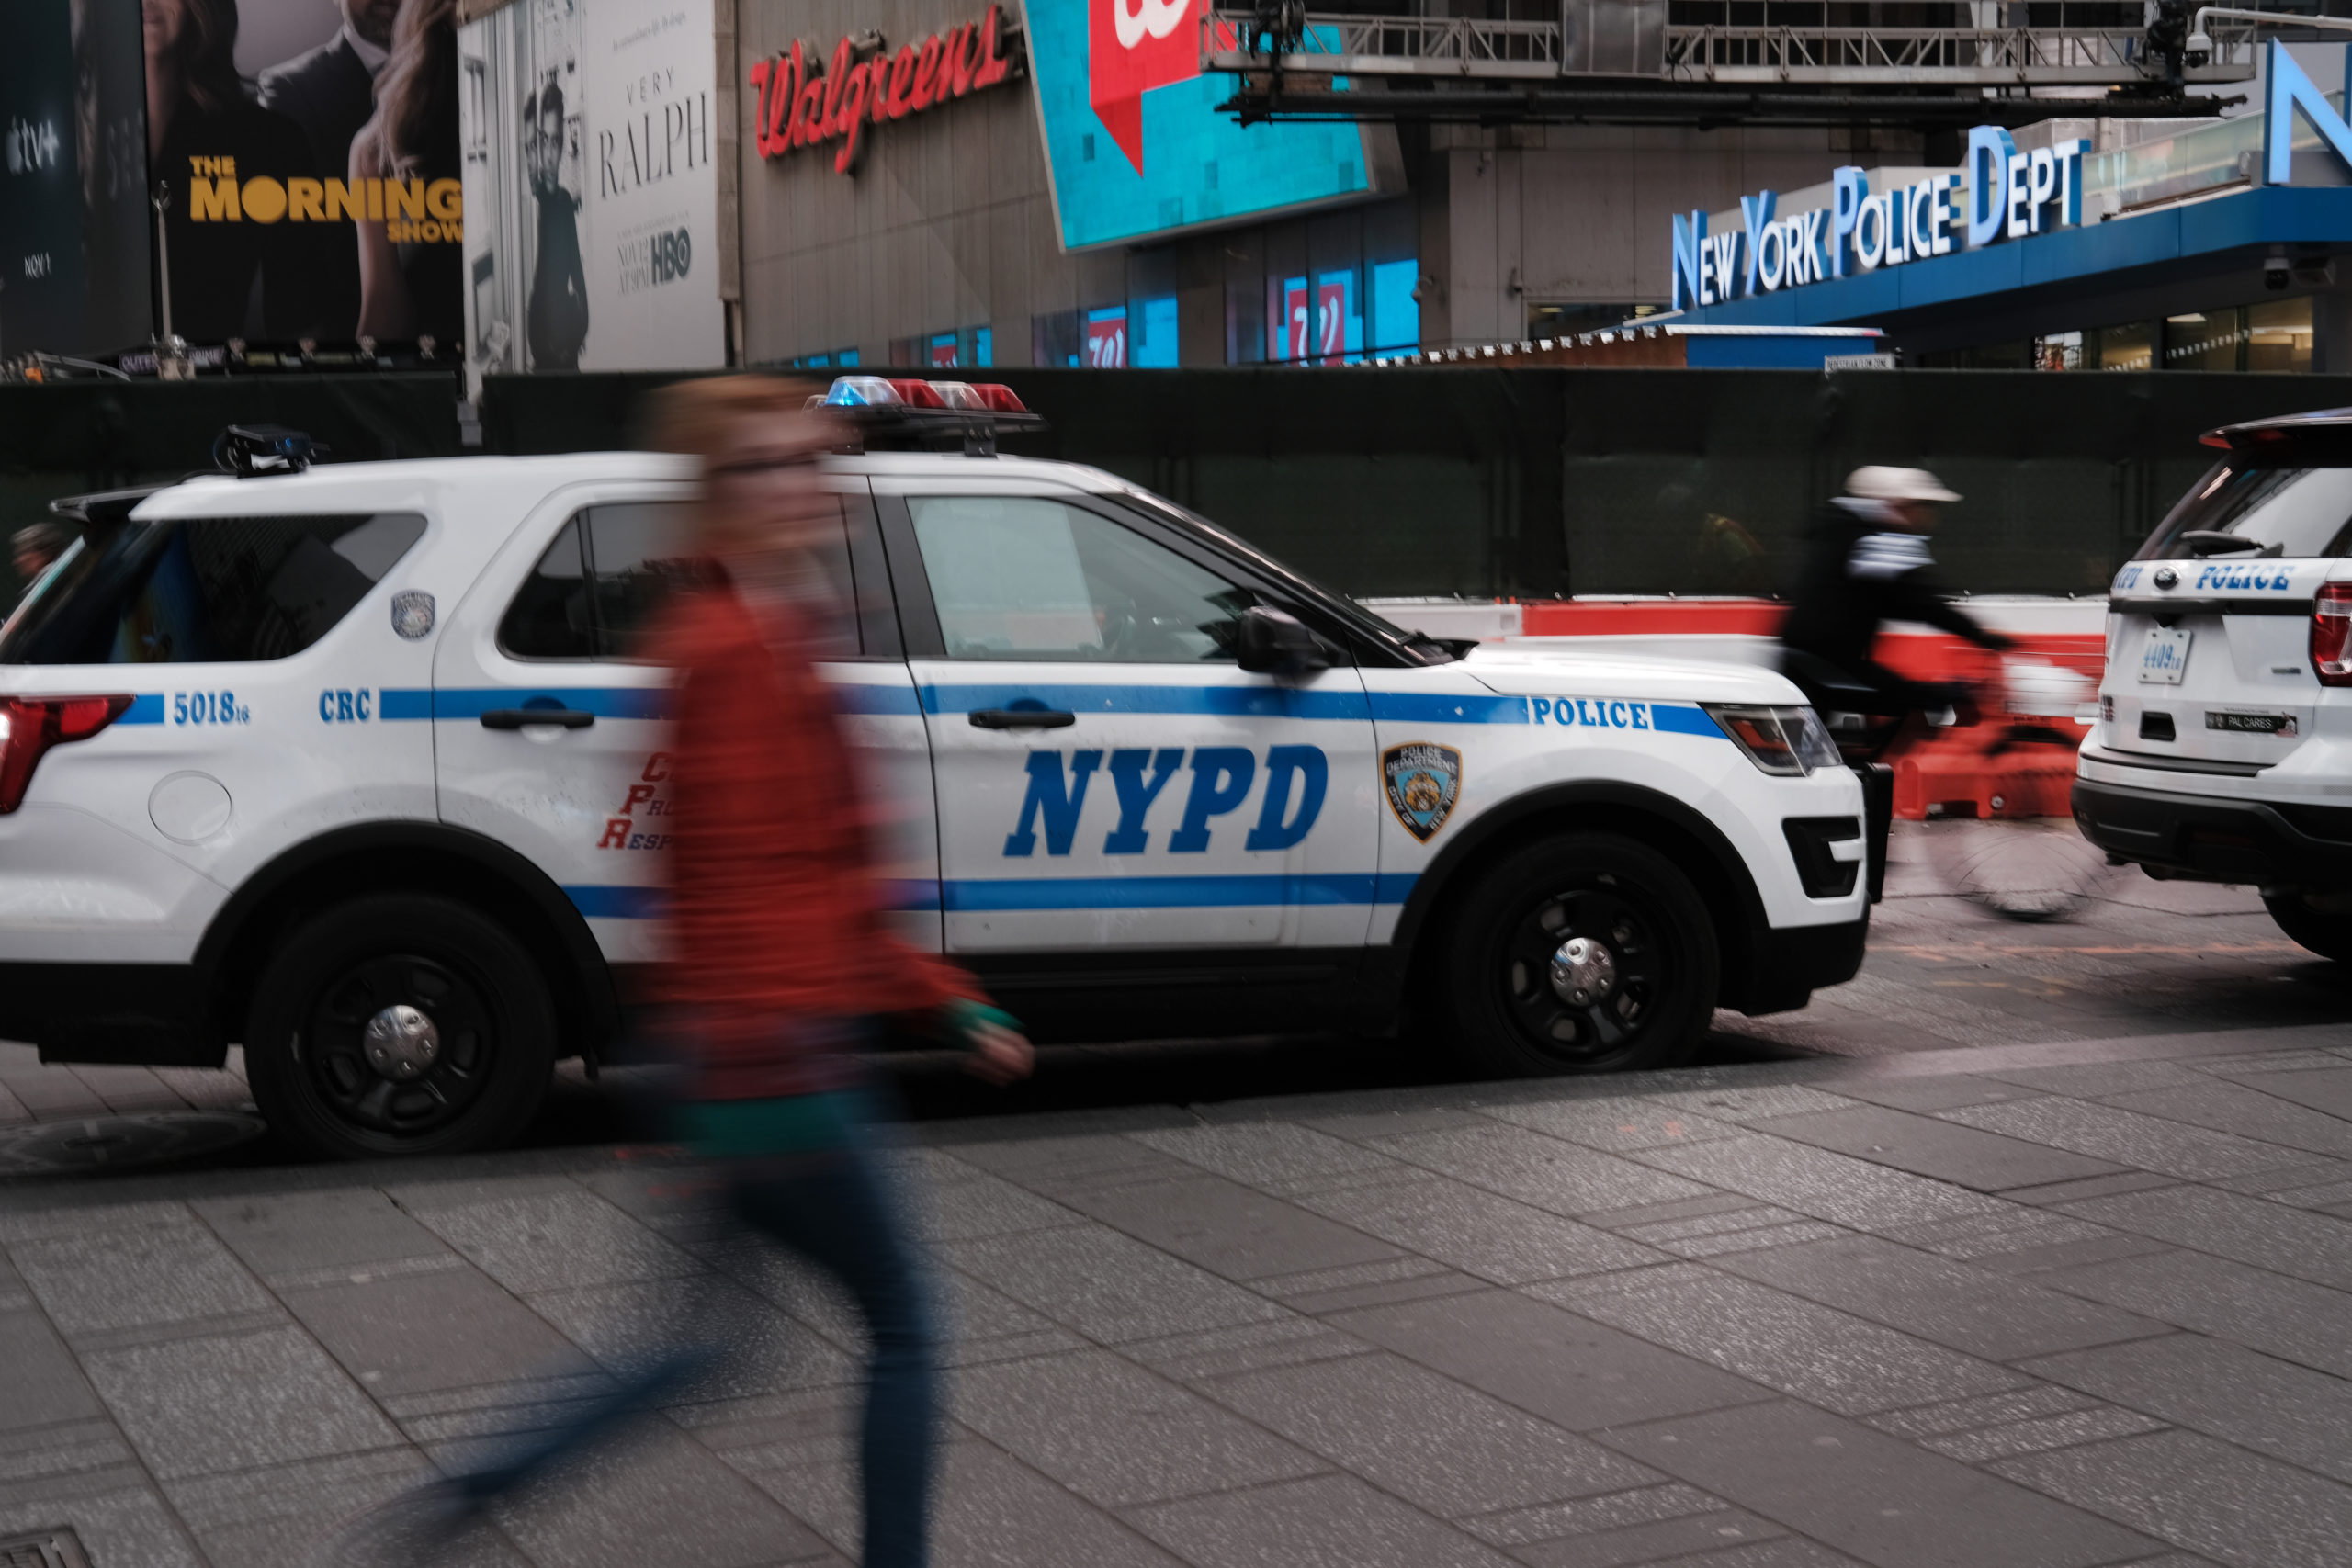 NEW YORK, NEW YORK - NOVEMBER 05: A police car sits outside of a Times Square substation on November 05, 2019 in New York City. Following a turbulent three-year run as Police Commissioner, James O’Neill announced yesterday his resignation and is to be replaced by Dermot Shea, the current chief of detectives. O'Neill's departure comes months after the firing of former officer Daniel Pantaleo due to his behavior in the incident that led to Eric Garner's death in Staten Island. The NYPD, the nations largest police department, is also facing a crisis of suicides amongst officers with 10 current officers having taken their lives this year alone. (Photo by Spencer Platt/Getty Images)